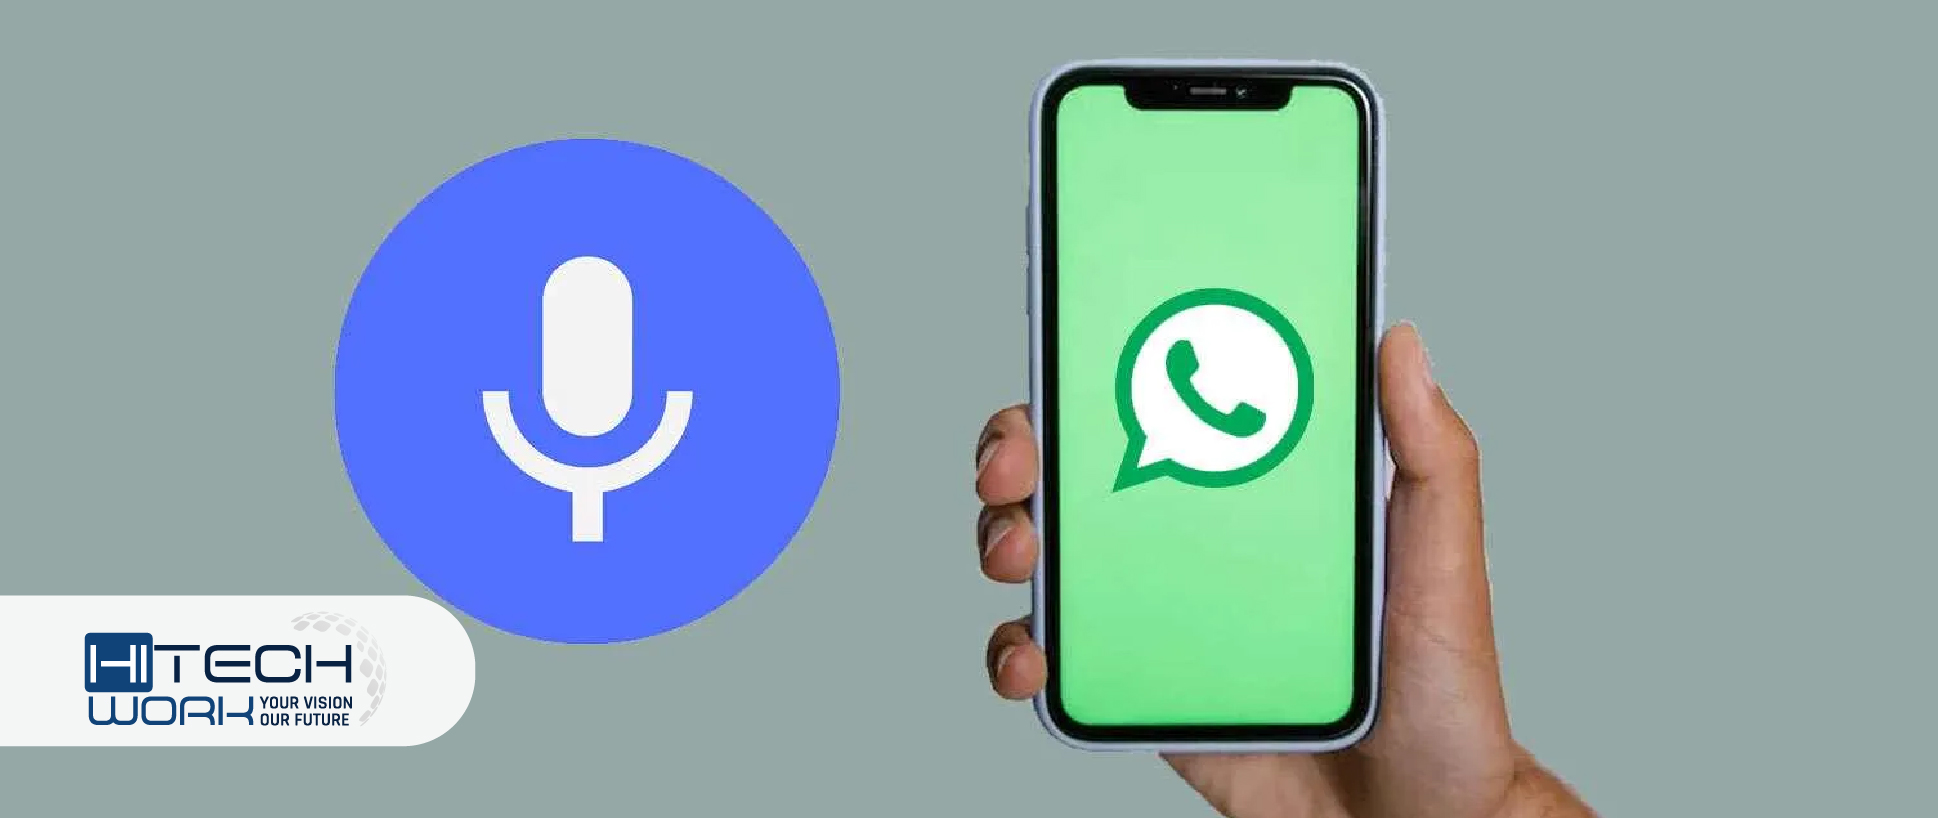 WhatsApp New Update will Add More Privacy to Audio Messages